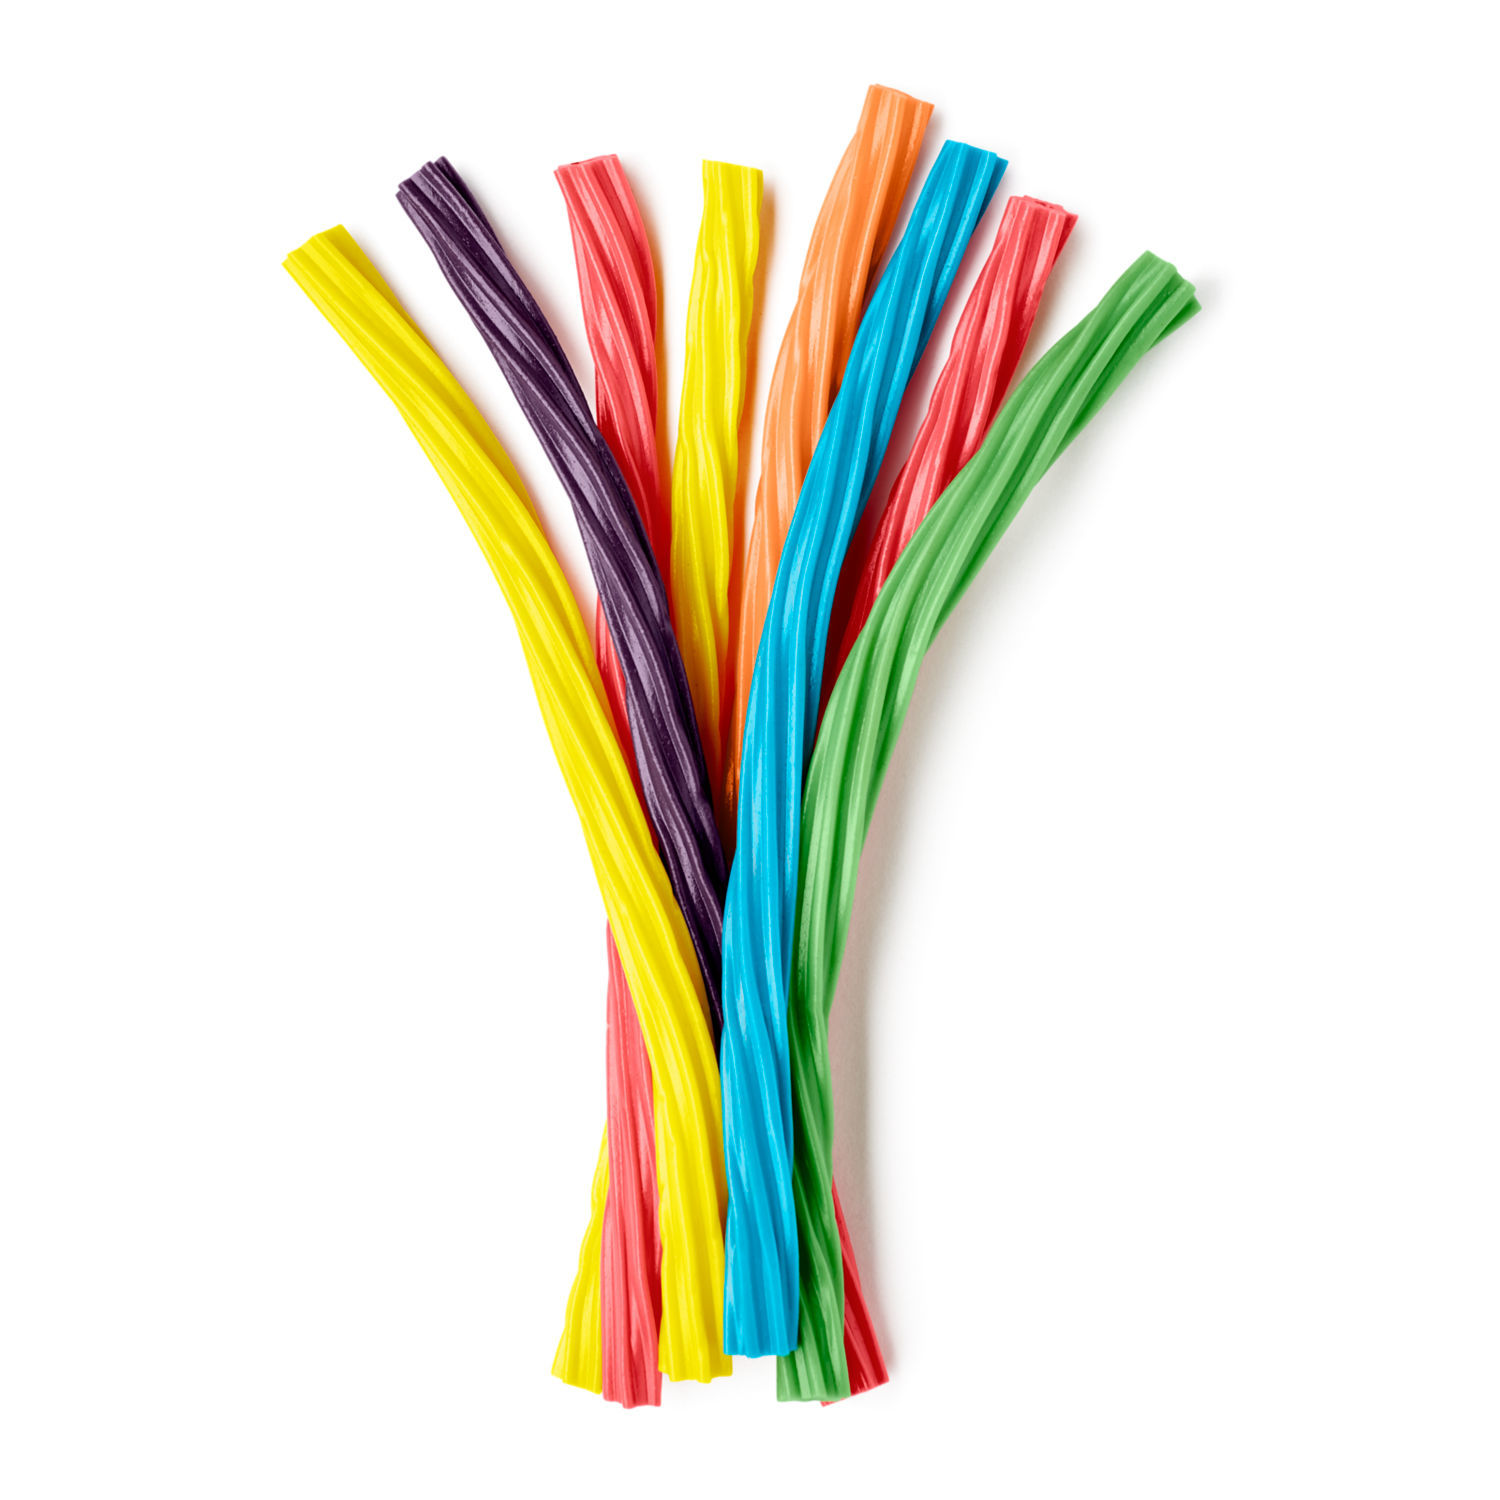 Twizzlers Twists Rainbow Flavored Licorice Style Candy, Bag 12.4 oz - image 3 of 8